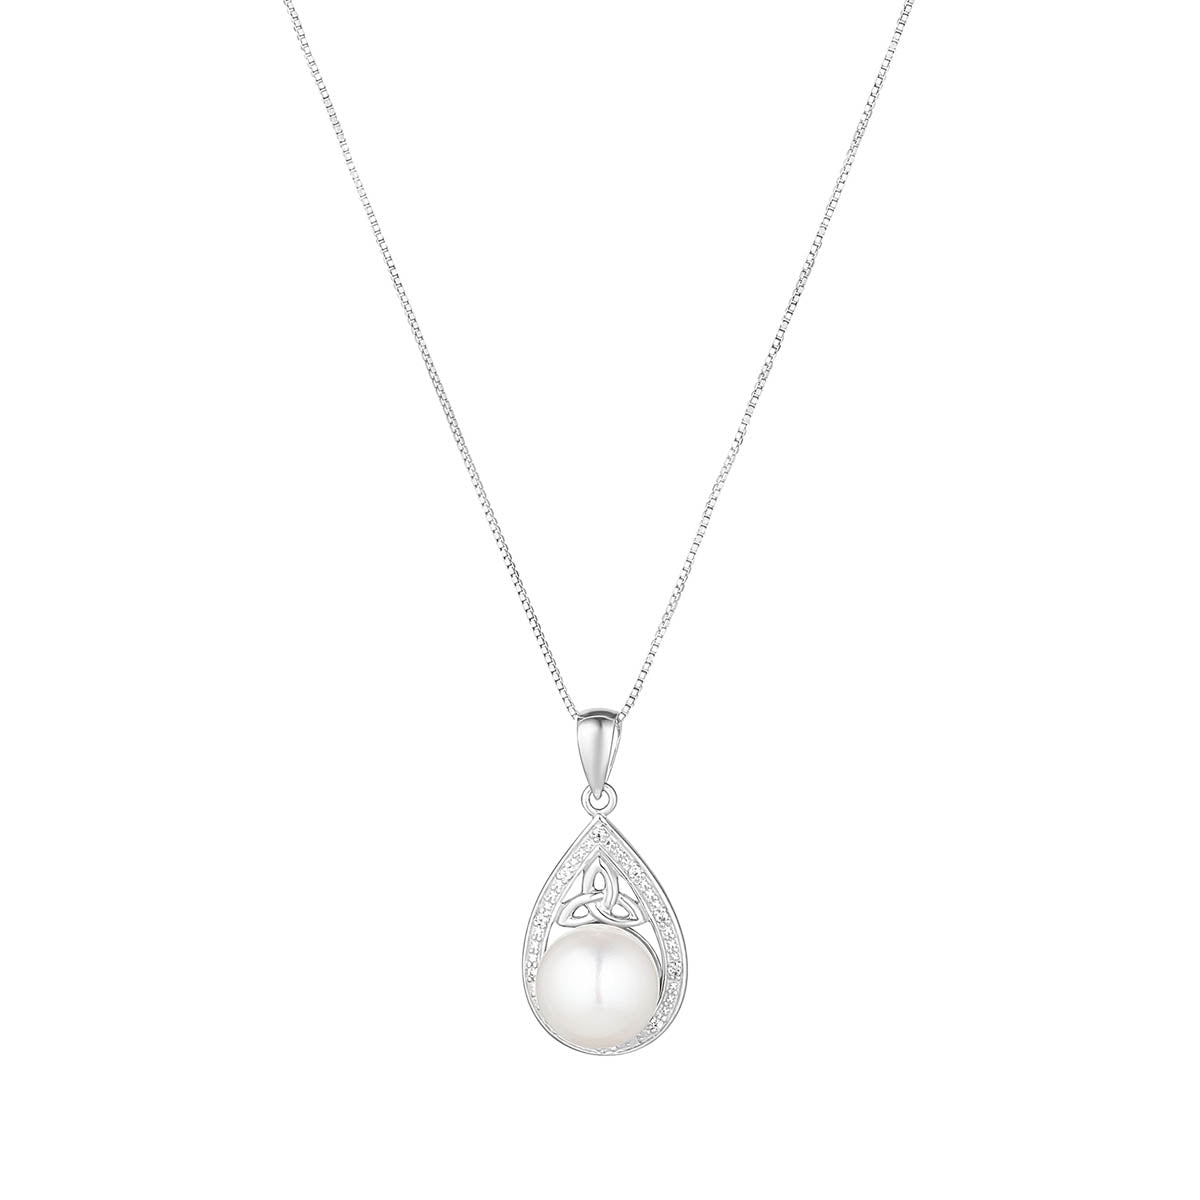 Solvar sterling silver crystal and pearl trinity knot teardrop necklace S46919